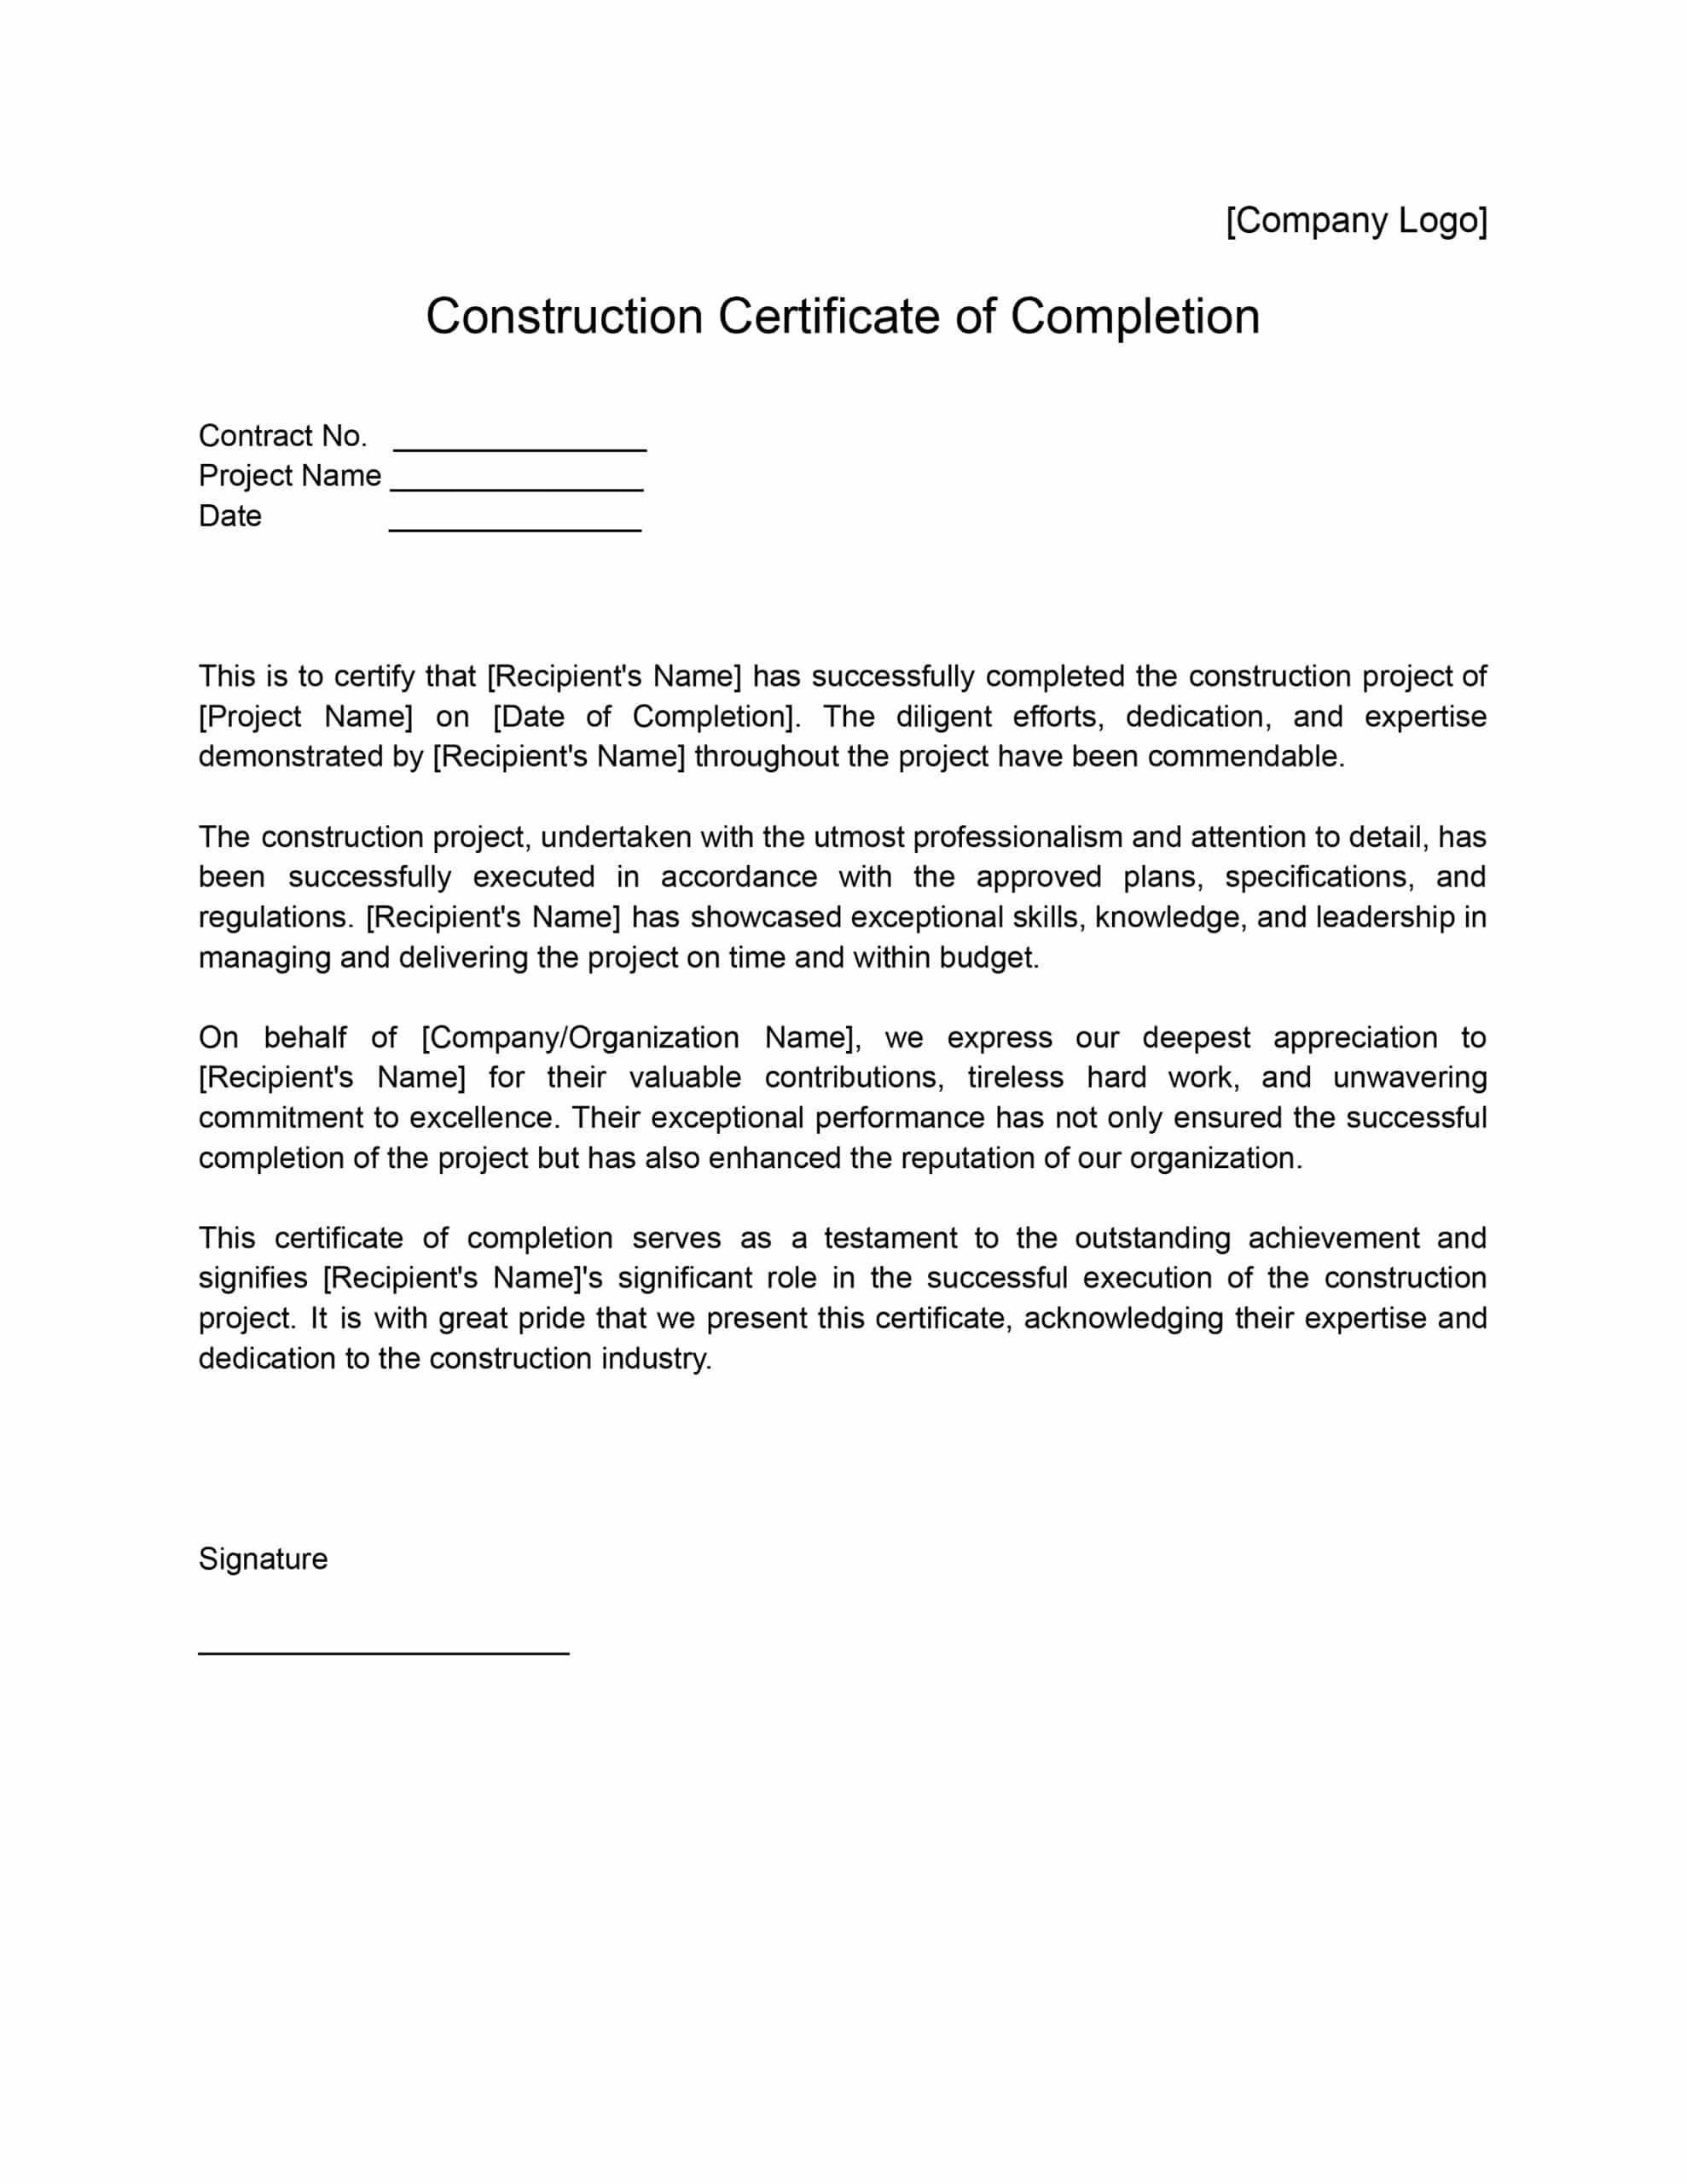 Construction Certificate of Completion